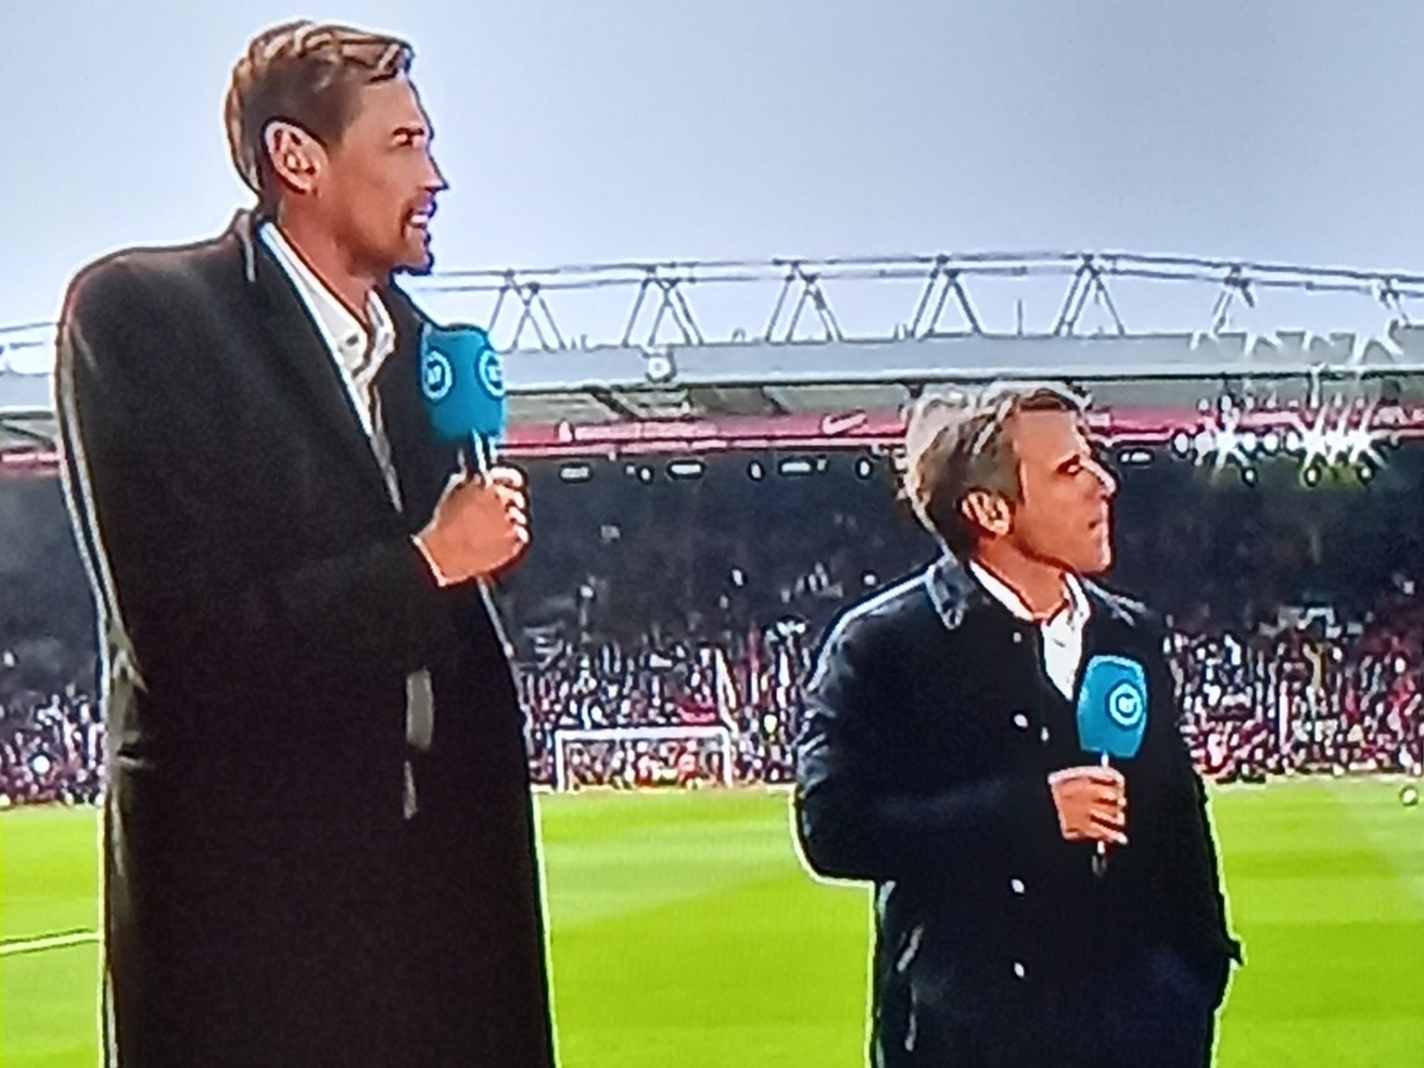 The height mismatch fans couldn’t ignore when Zola stood next to Crouch and Rio